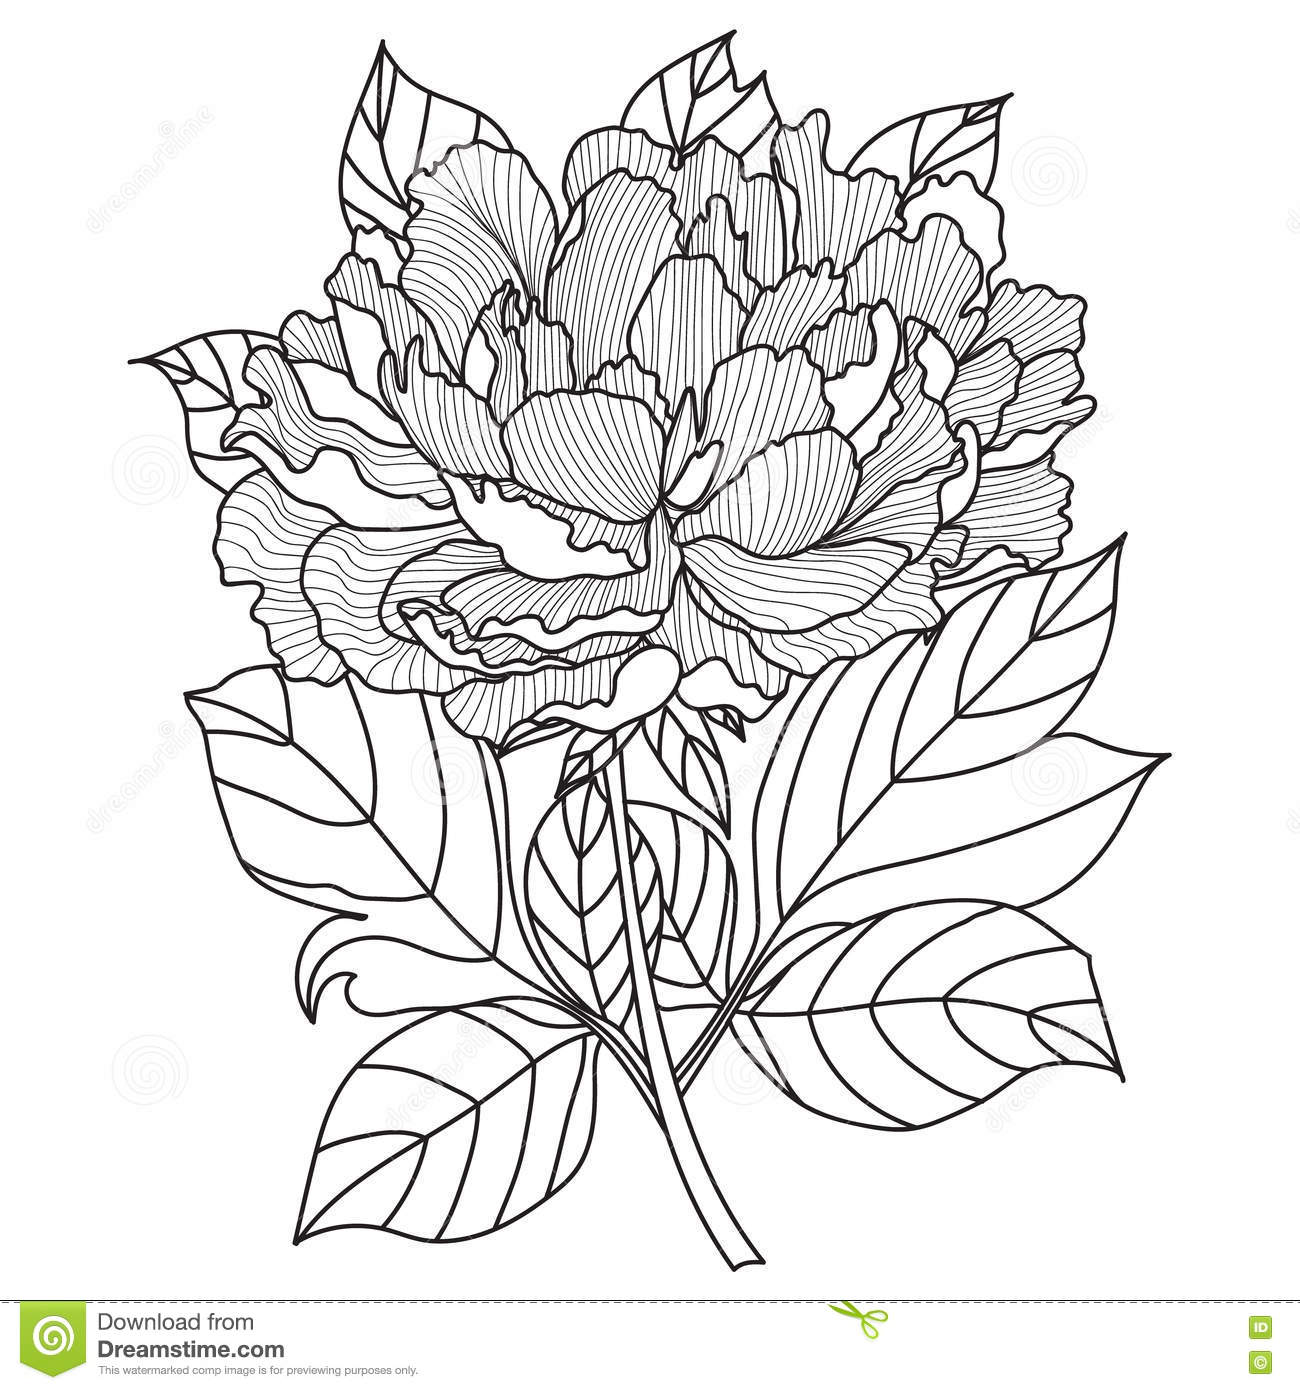 Peony coloring #8, Download drawings